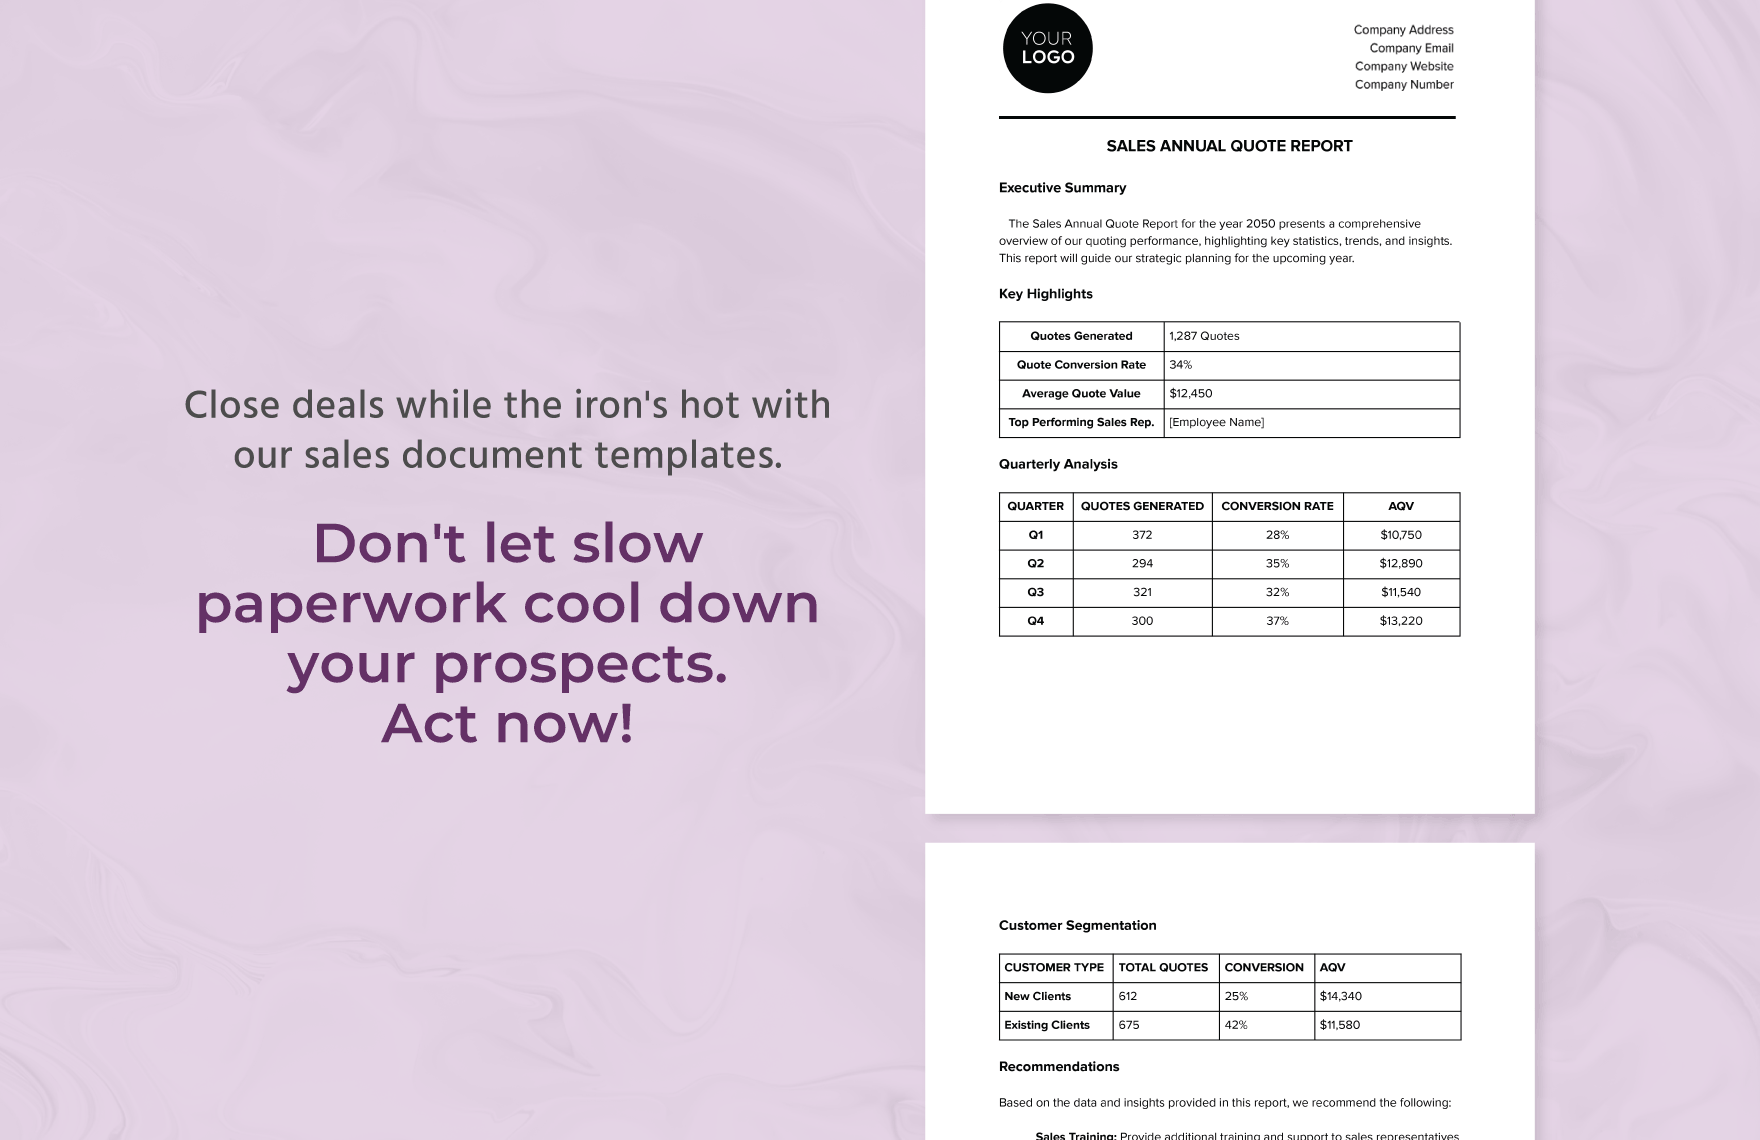 Sales Annual Quote Report Template